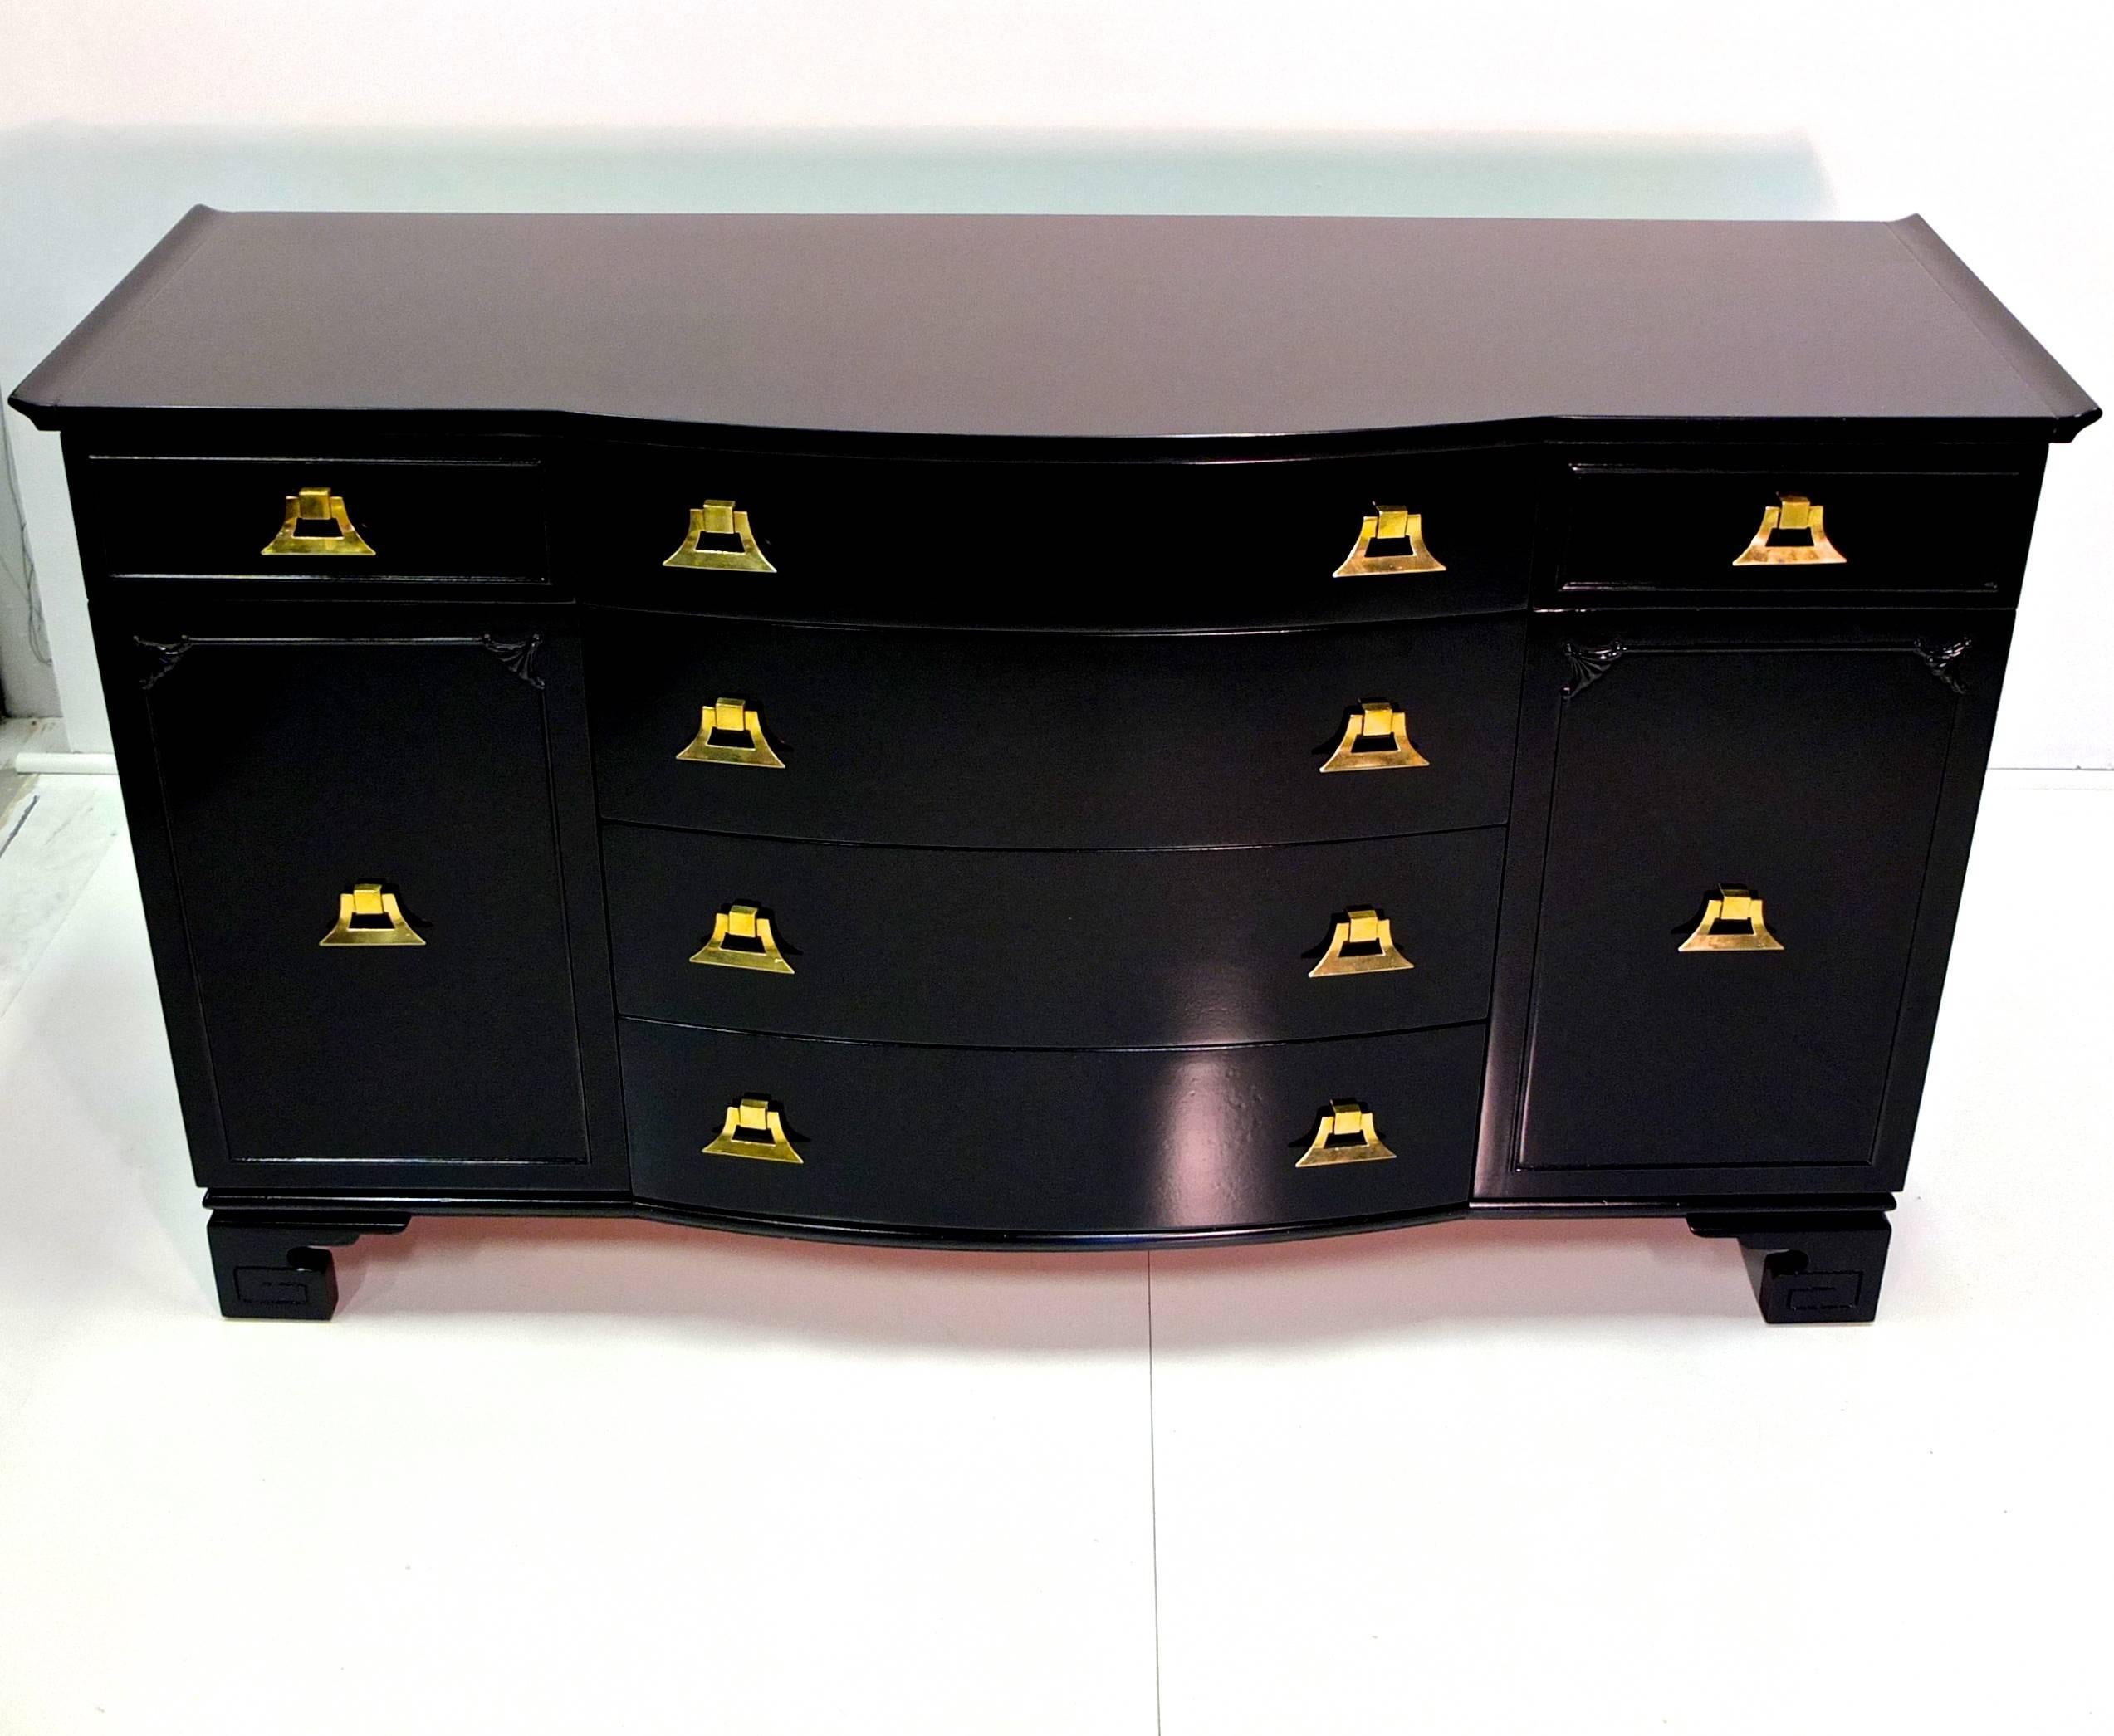 Pagoda form black and brass sideboard buffet in the style of James Mont with ming shaped feet and Asian motif detailing from the Exotic Modernist movement of the late 1940s-early 1950s, including distinctive solid brass bell form decorative pulls.